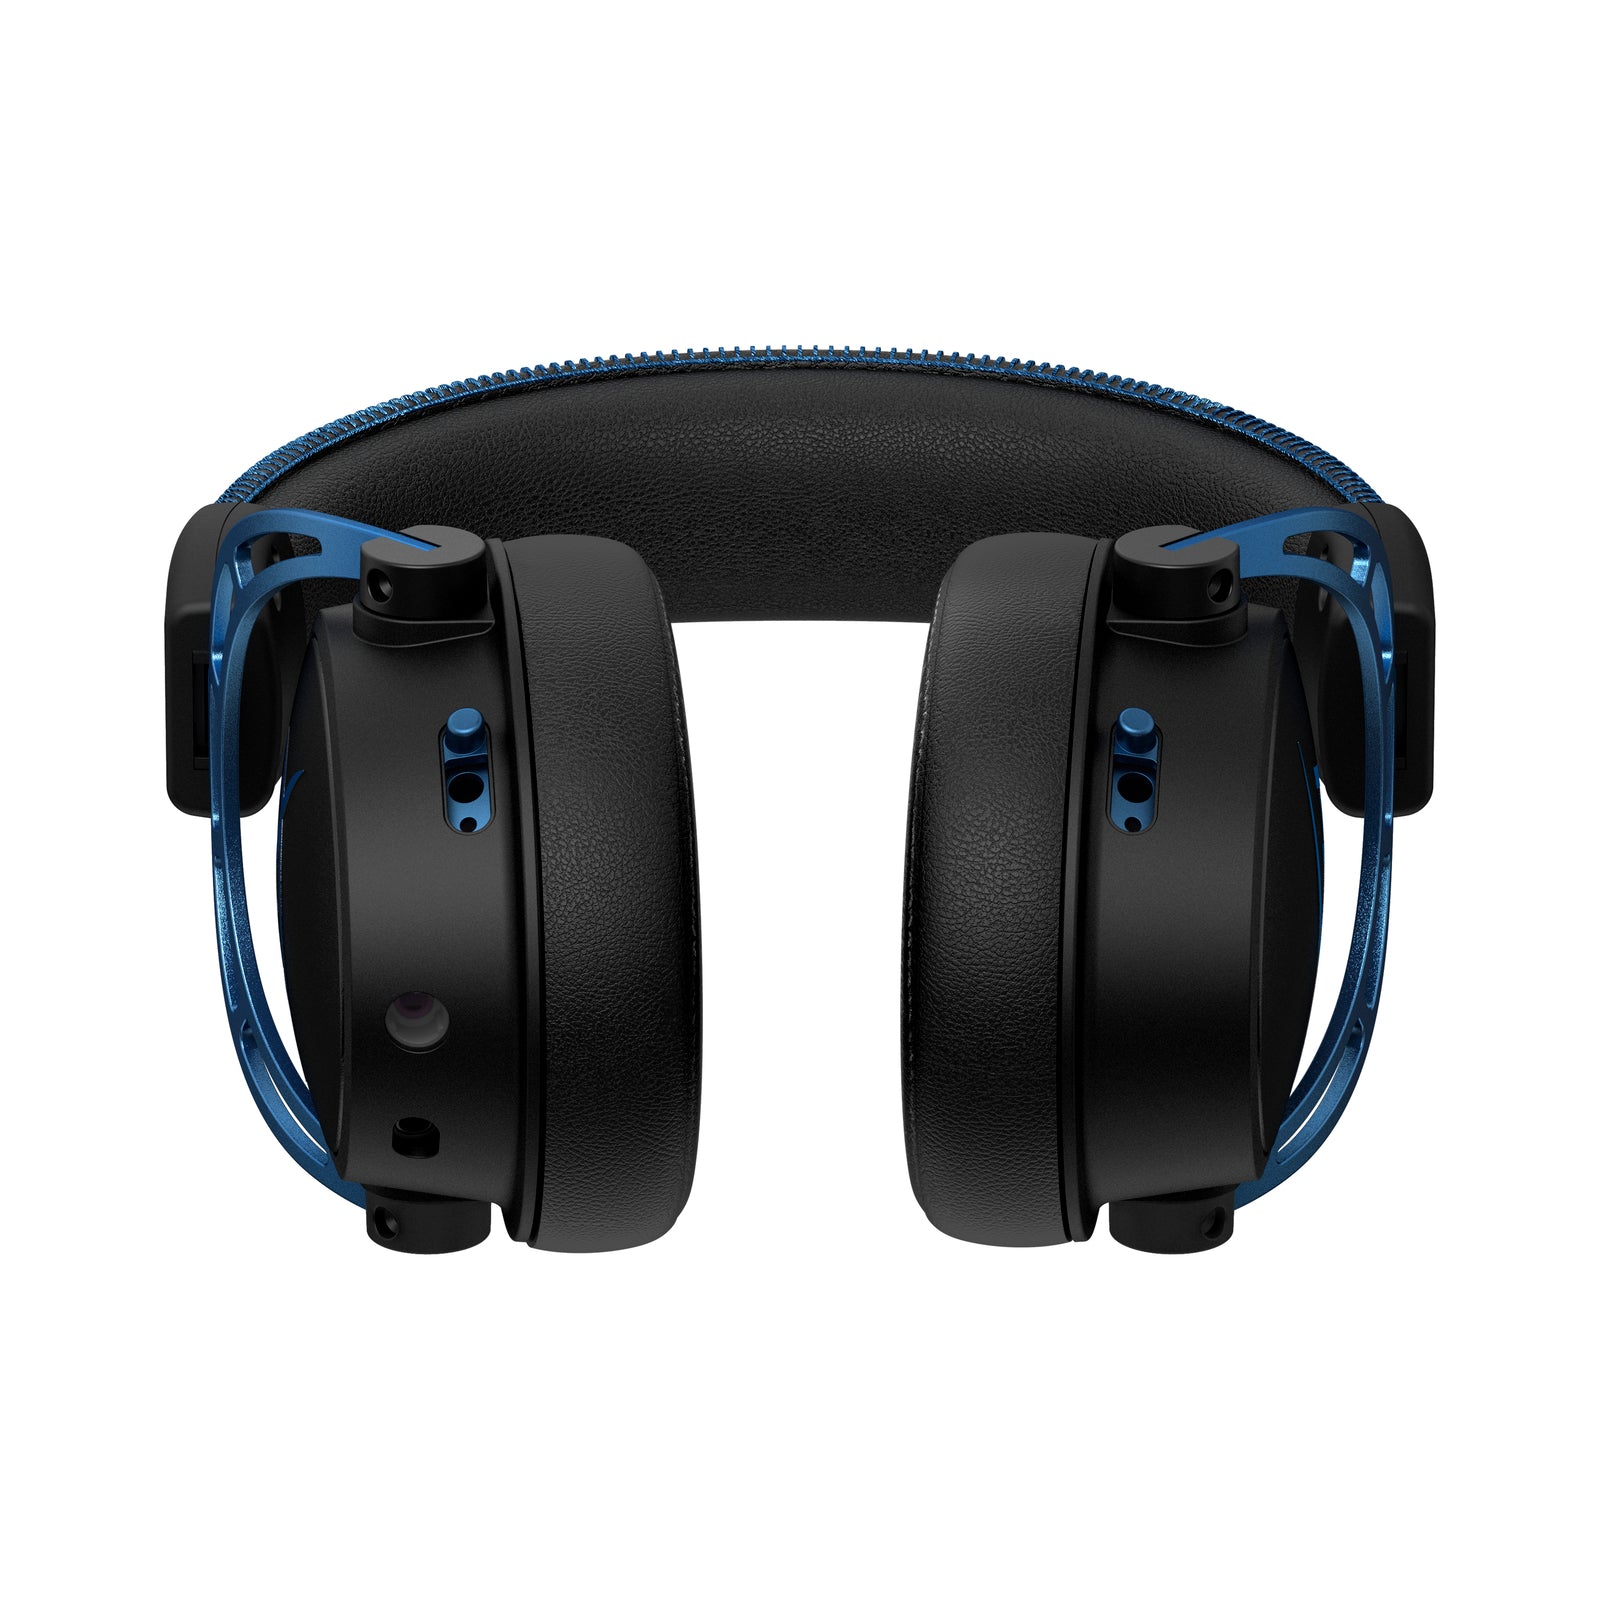 Cloud Alpha S – USB HyperX Headset | Surround Sound 7.1 with Gaming